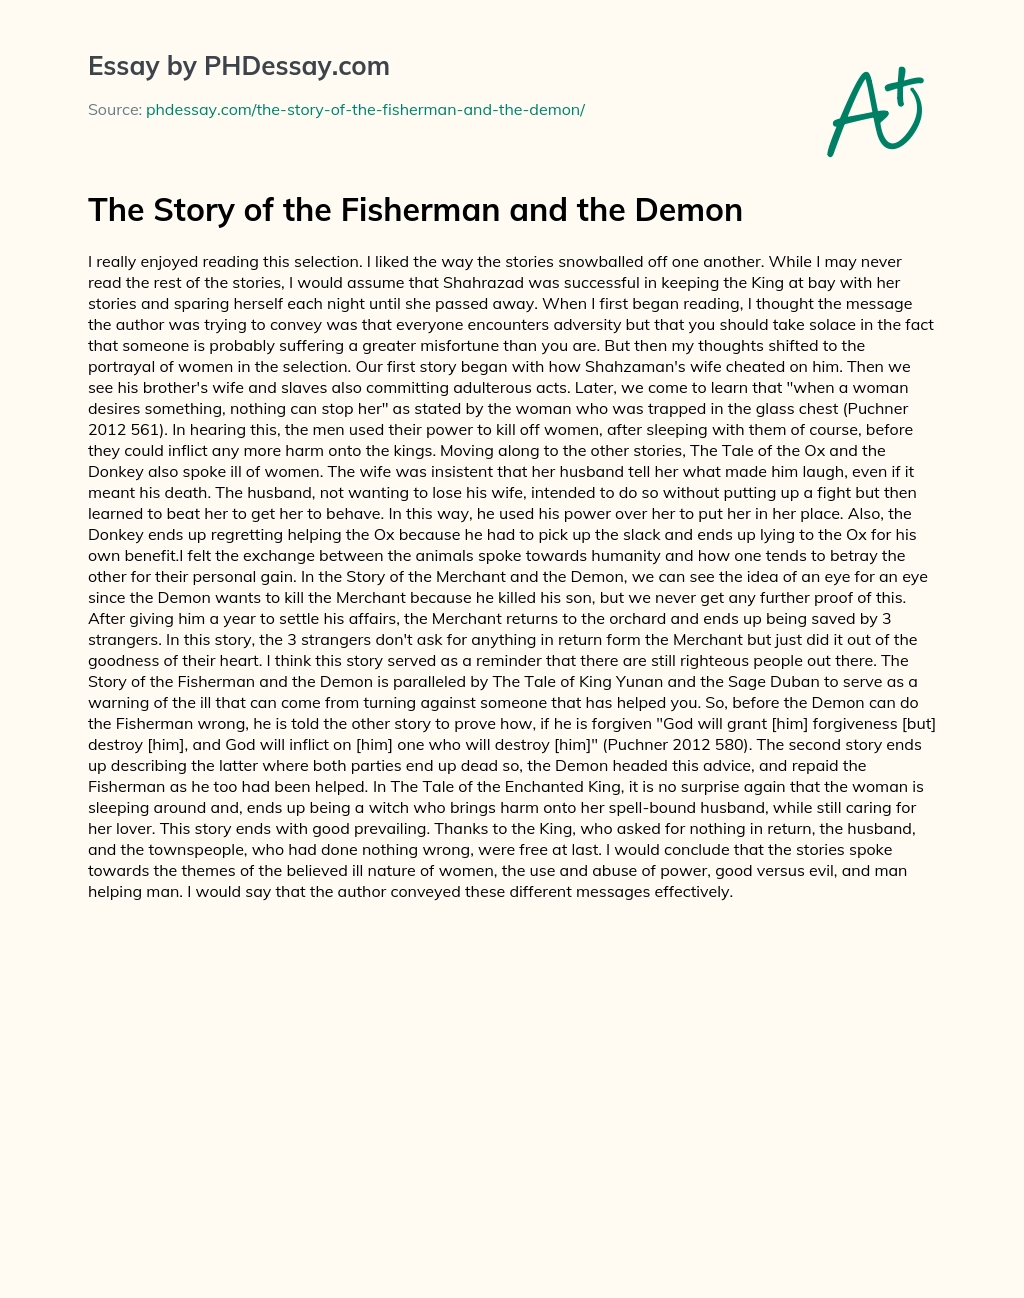 The Story of the Fisherman and the Demon essay